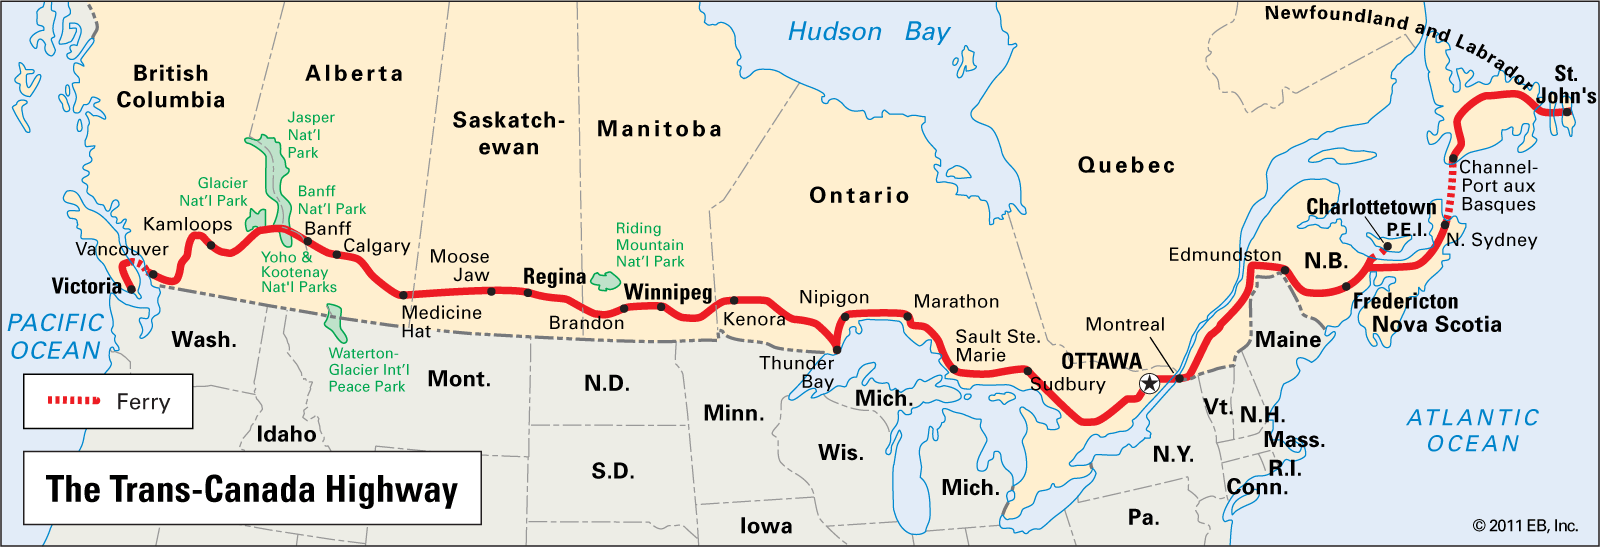 A map of Canada with a red line indicating the Trans-Canada Highway